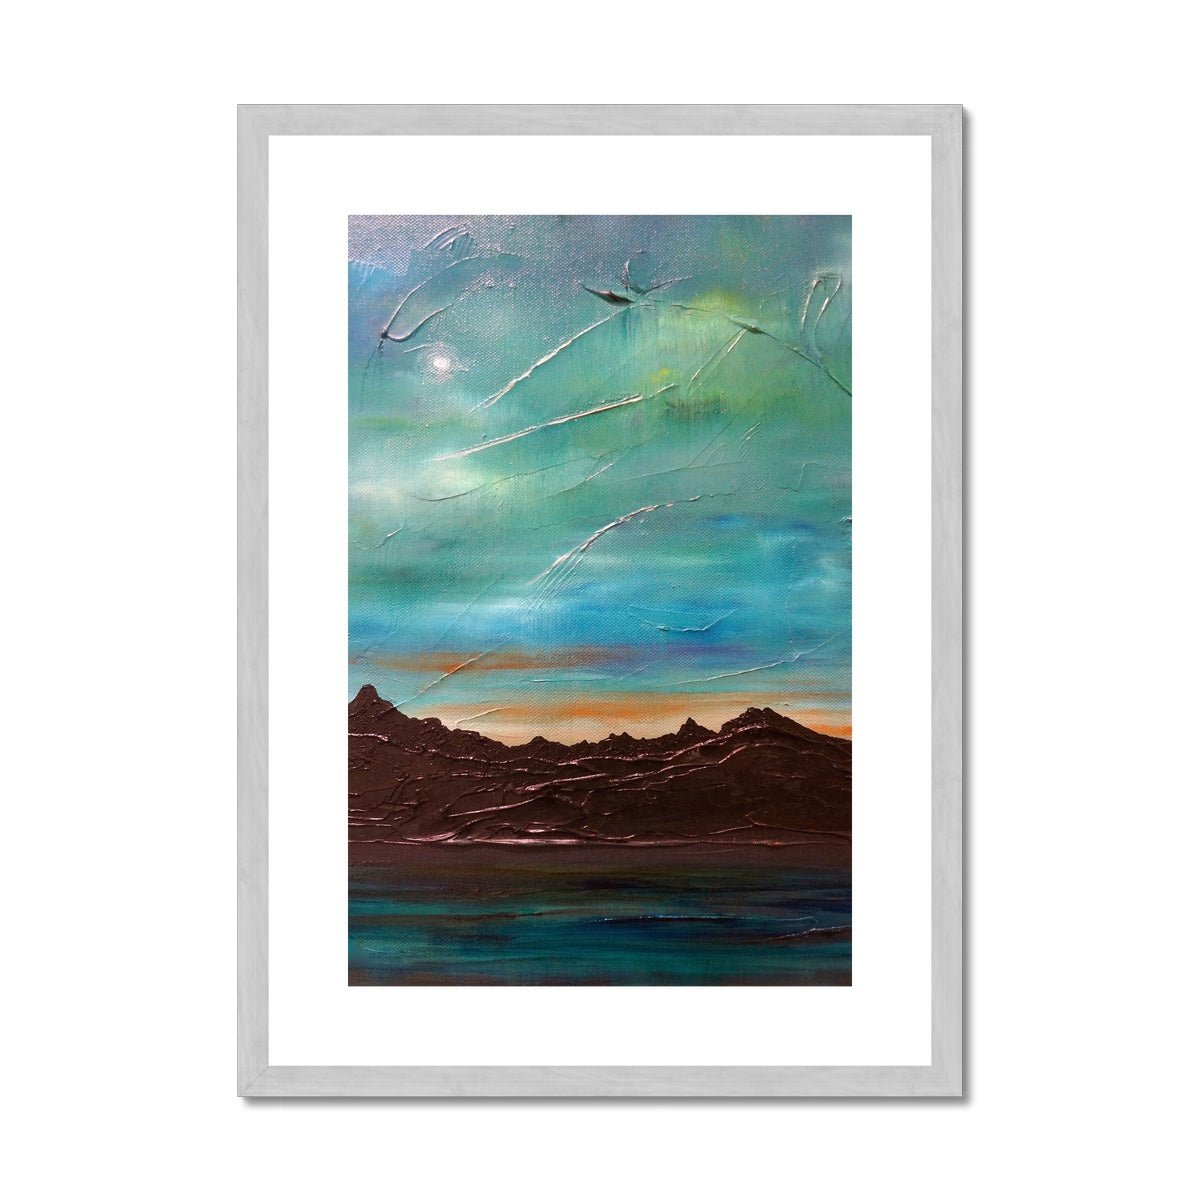 The Cuillin From Elgol Skye Painting | Antique Framed & Mounted Prints From Scotland-Antique Framed & Mounted Prints-Skye Art Gallery-A2 Portrait-Silver Frame-Paintings, Prints, Homeware, Art Gifts From Scotland By Scottish Artist Kevin Hunter